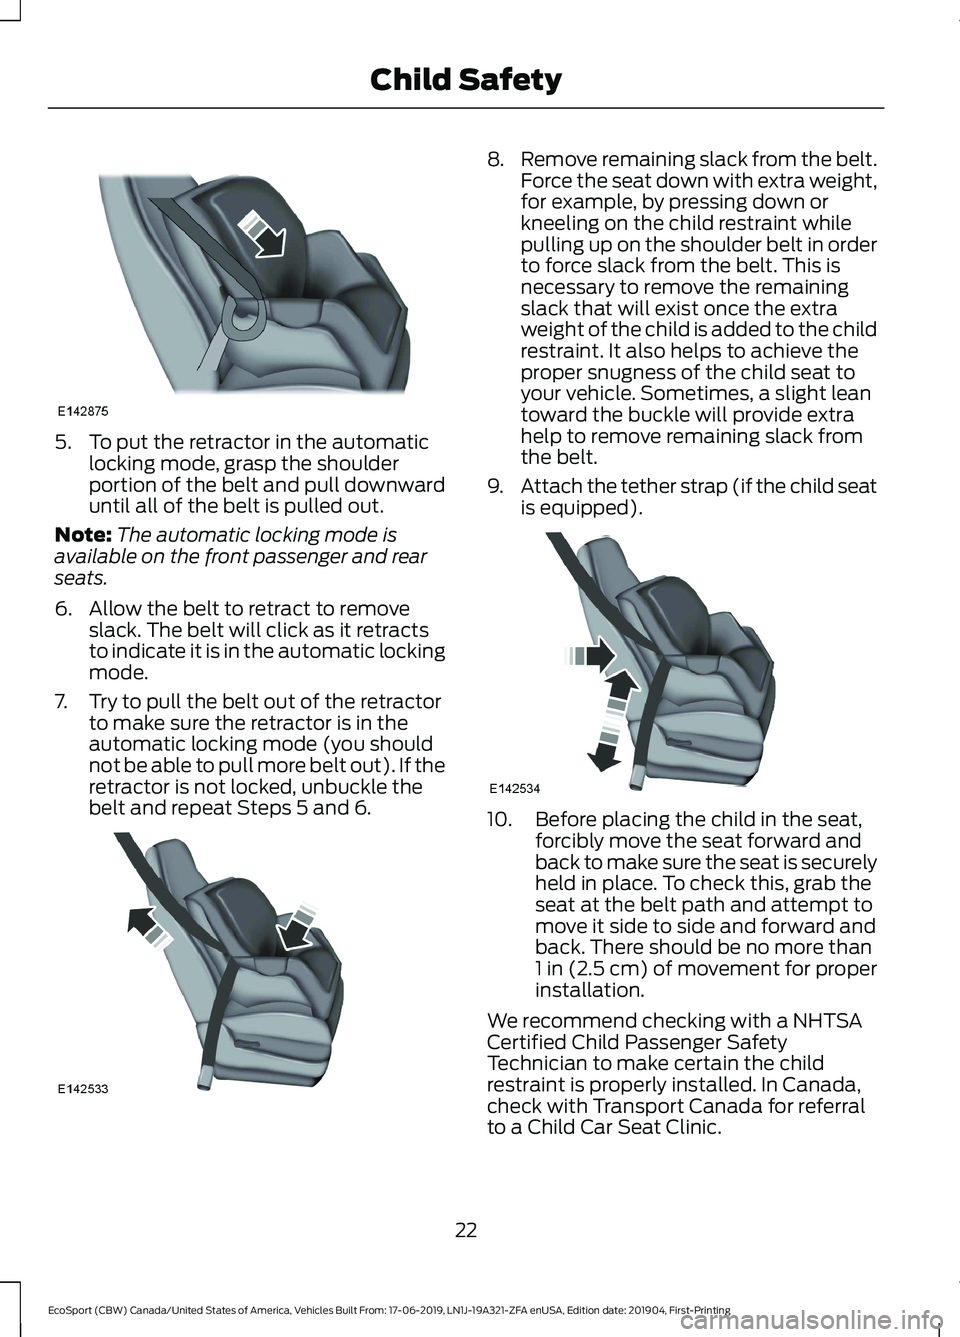 FORD ECOSPORT 2020  Owners Manual 5.To put the retractor in the automaticlocking mode, grasp the shoulderportion of the belt and pull downwarduntil all of the belt is pulled out.
Note:The automatic locking mode isavailable on the fron